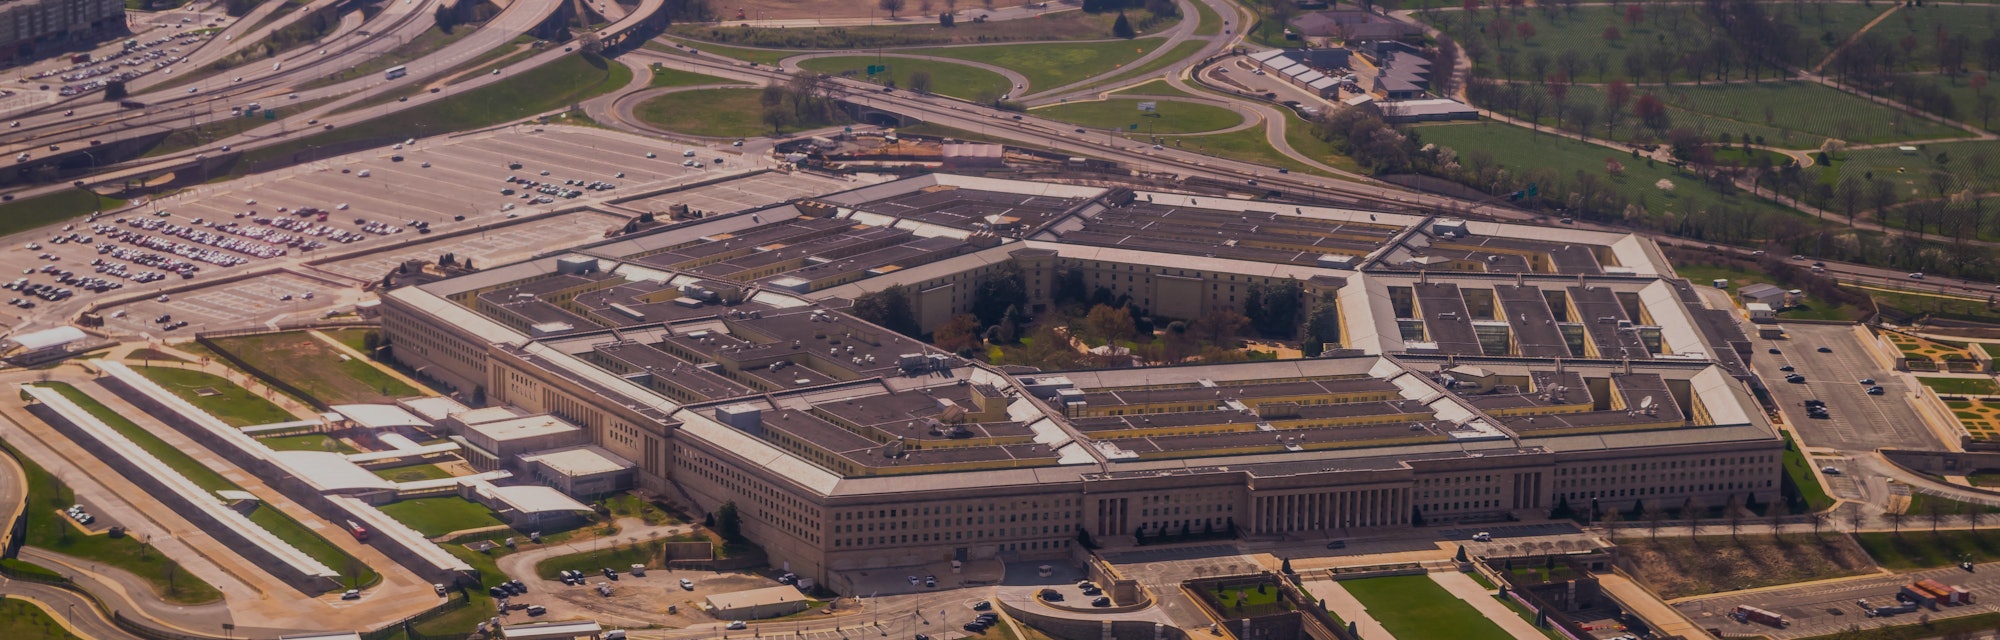 The Pentagon from above in Washington, DC